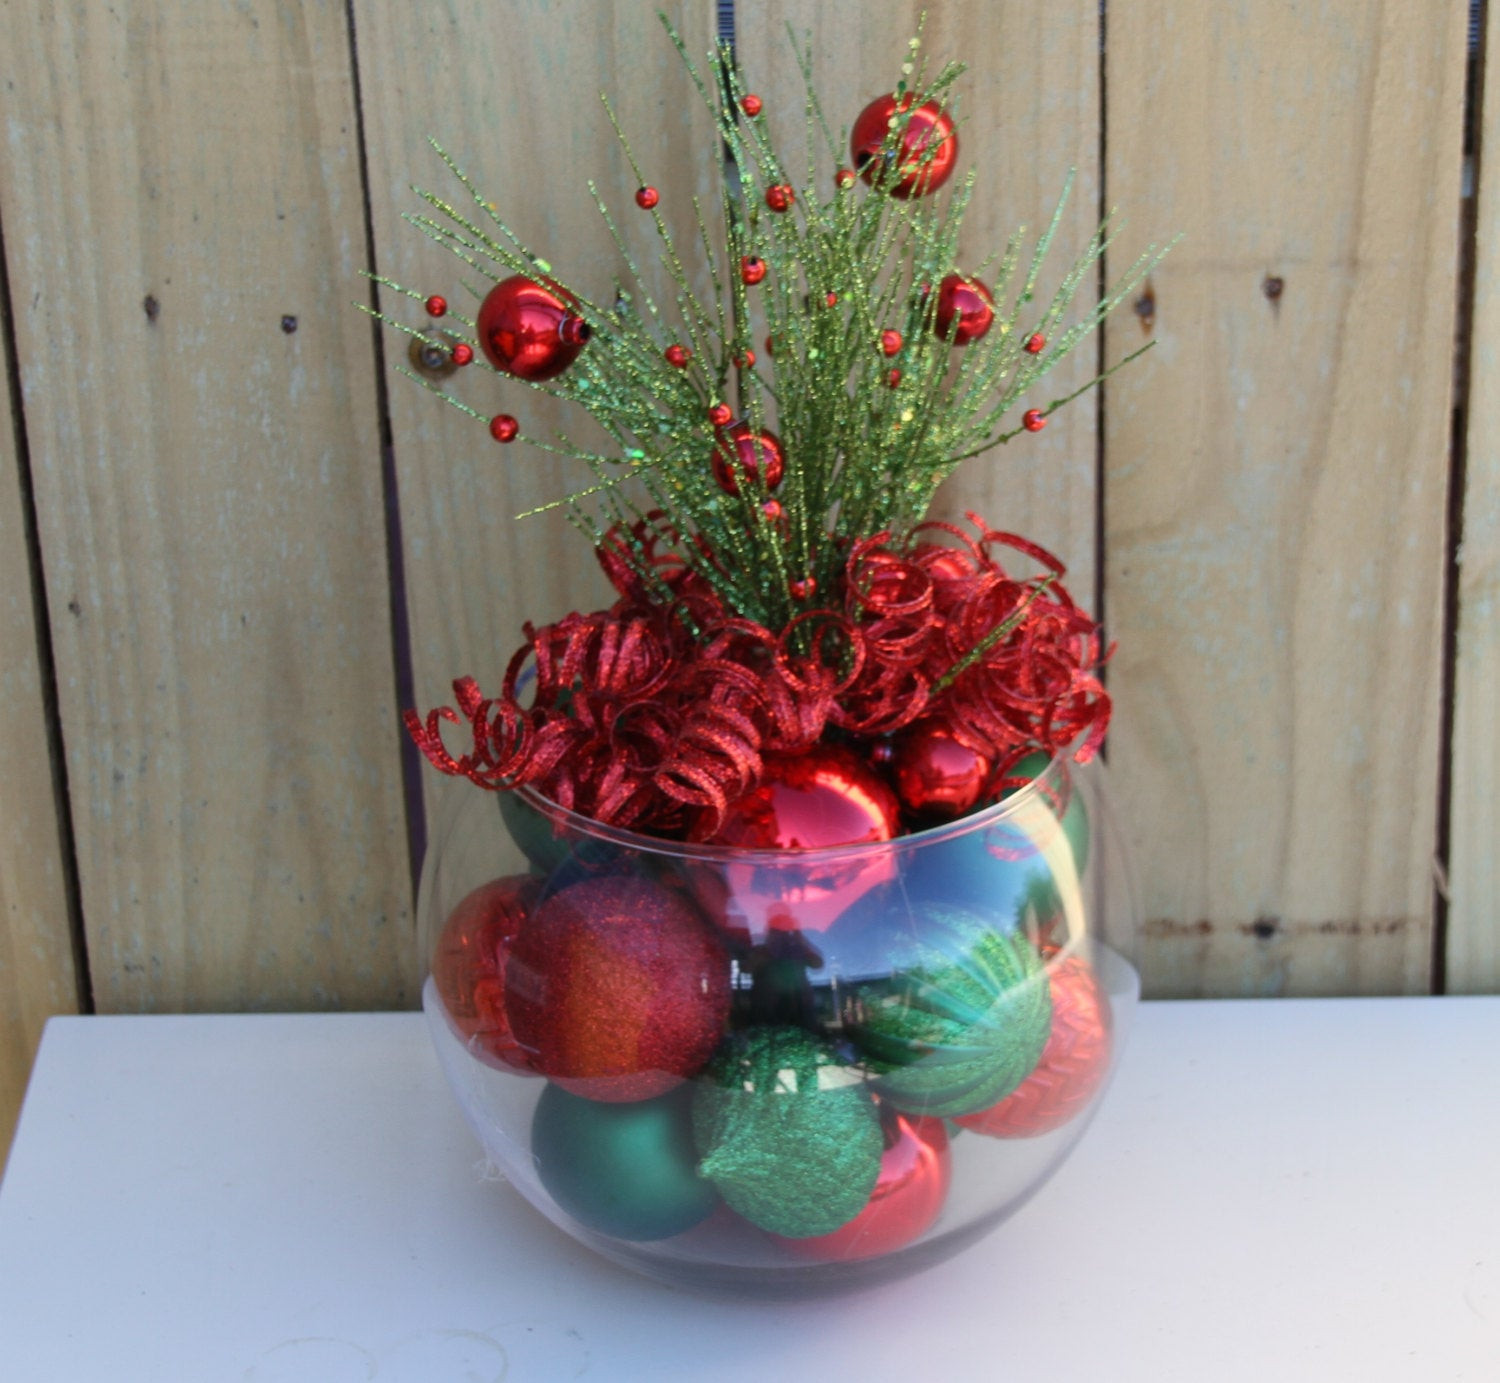 Holiday Party Centerpiece Ideas
 Christmas Table Decor Centerpiece Red and Green for Holiday